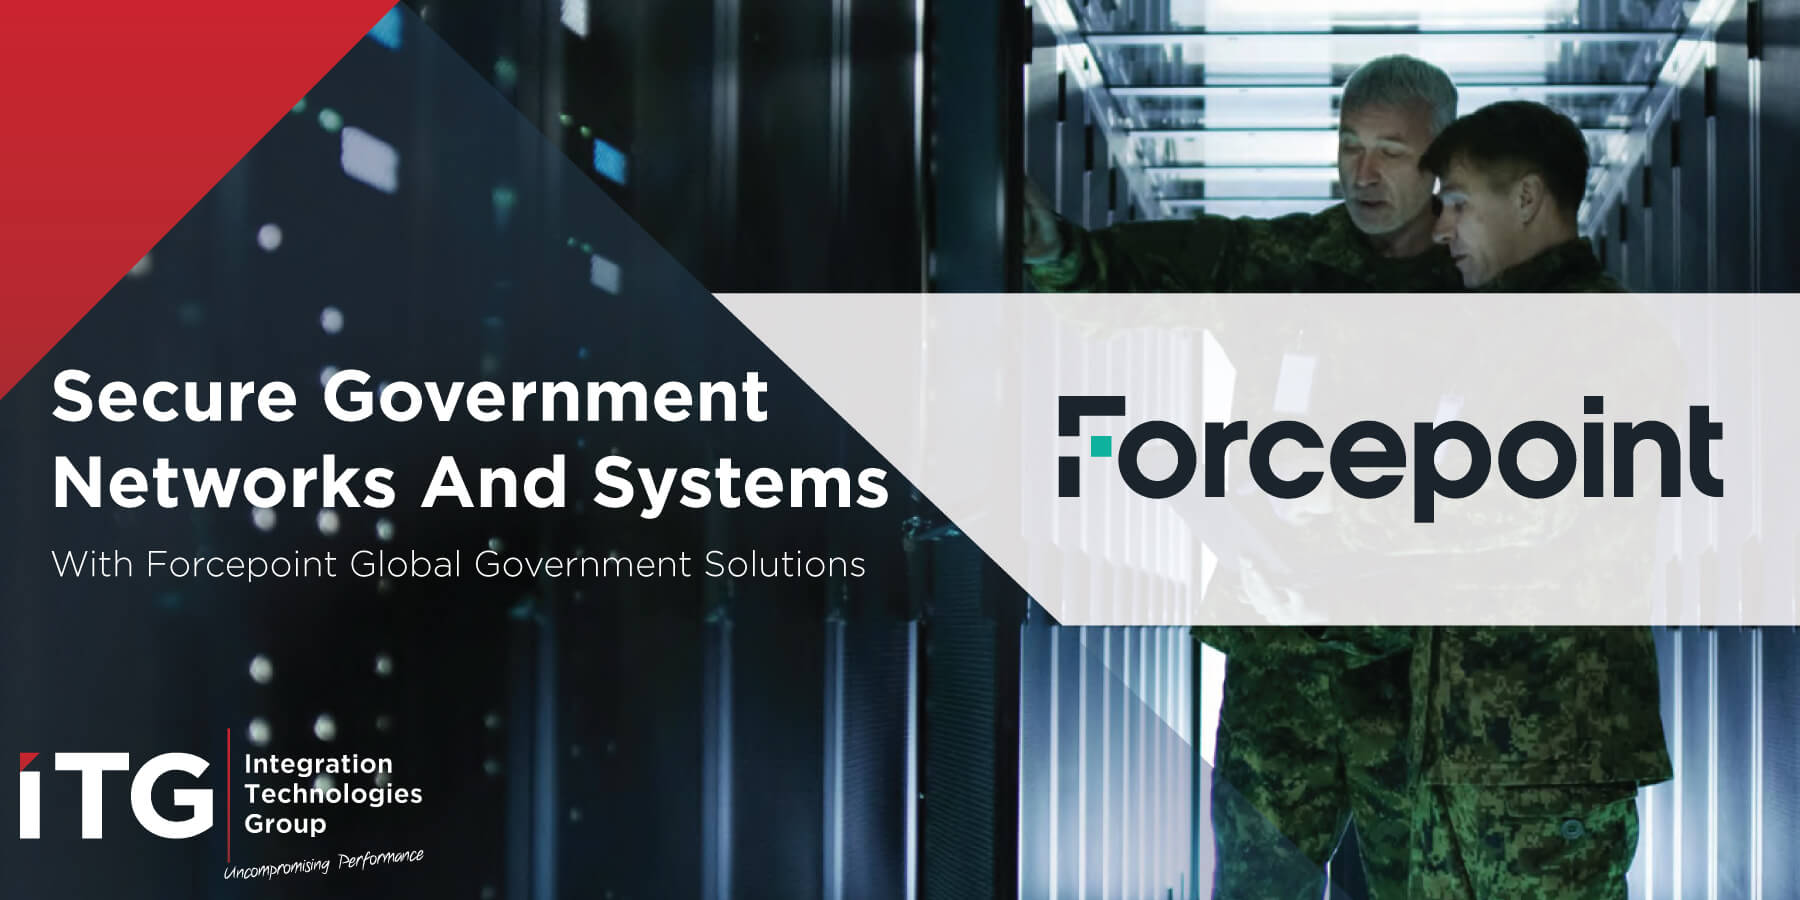 Forcepoint Secure Government Networks And Systems